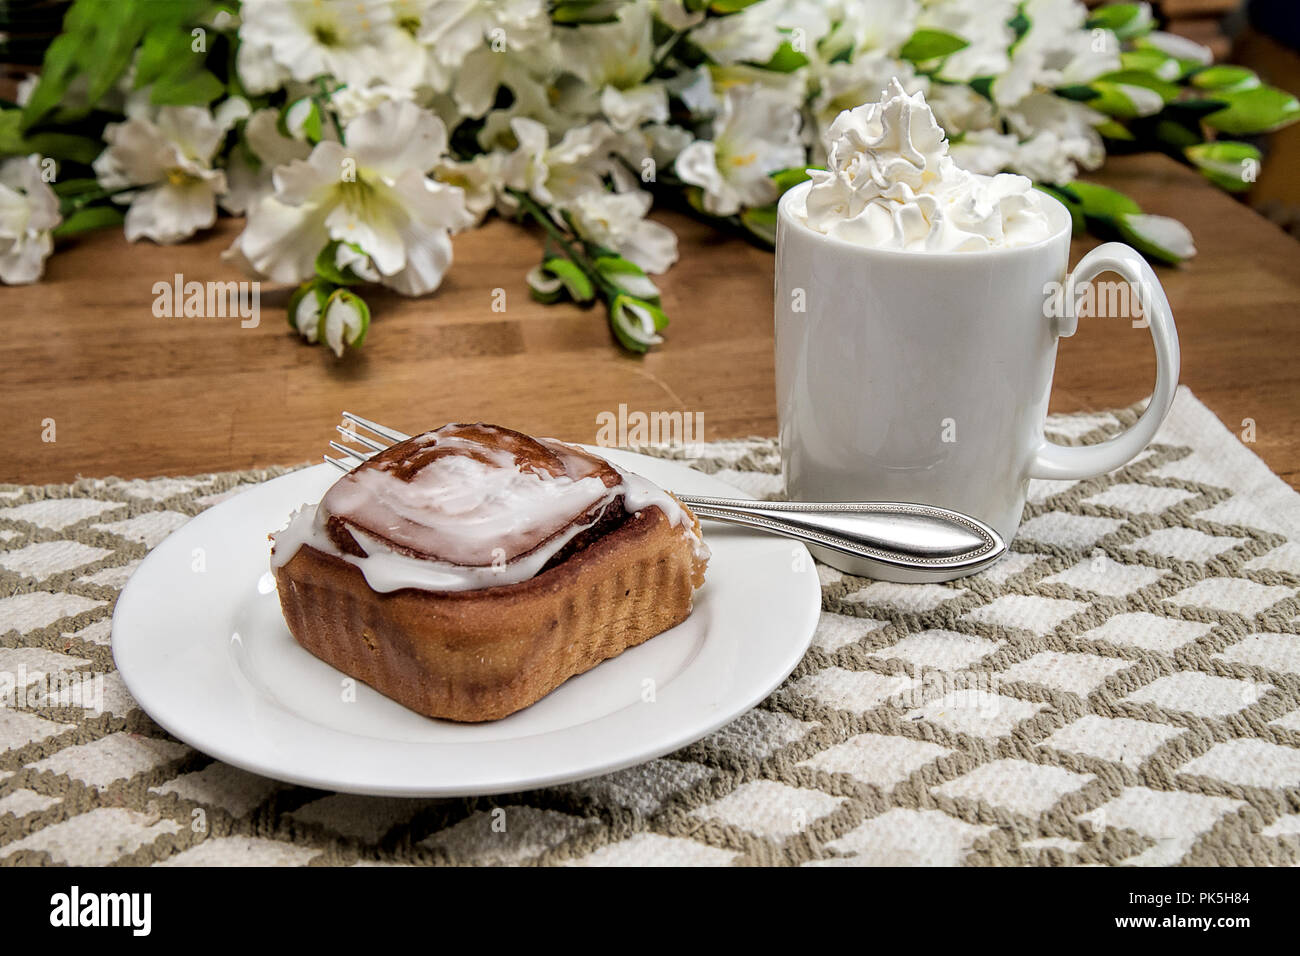 Hot chocolate loaded with whipped cream.  Flow blue dishes.  Large frosted danish all on kitchen table with window background and flowers. Stock Photo